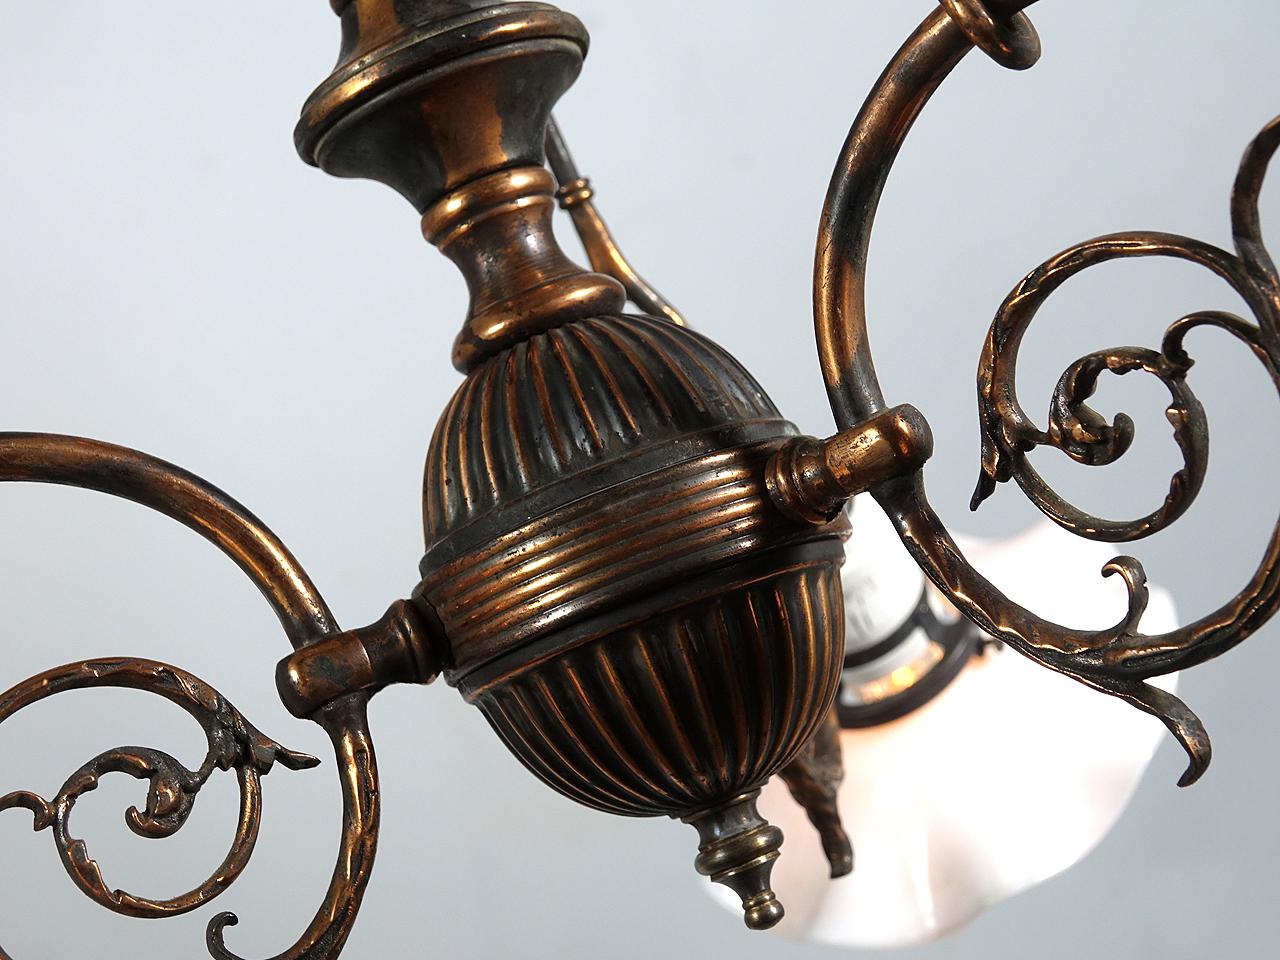 This is a late 1800s gas lamp that has been wired for electric. This fixture has everything going for it and is a real gem. The japanned finish, white porcelain sockets with tiny milk glass ruffled shades, decorative cast arms and support rods make